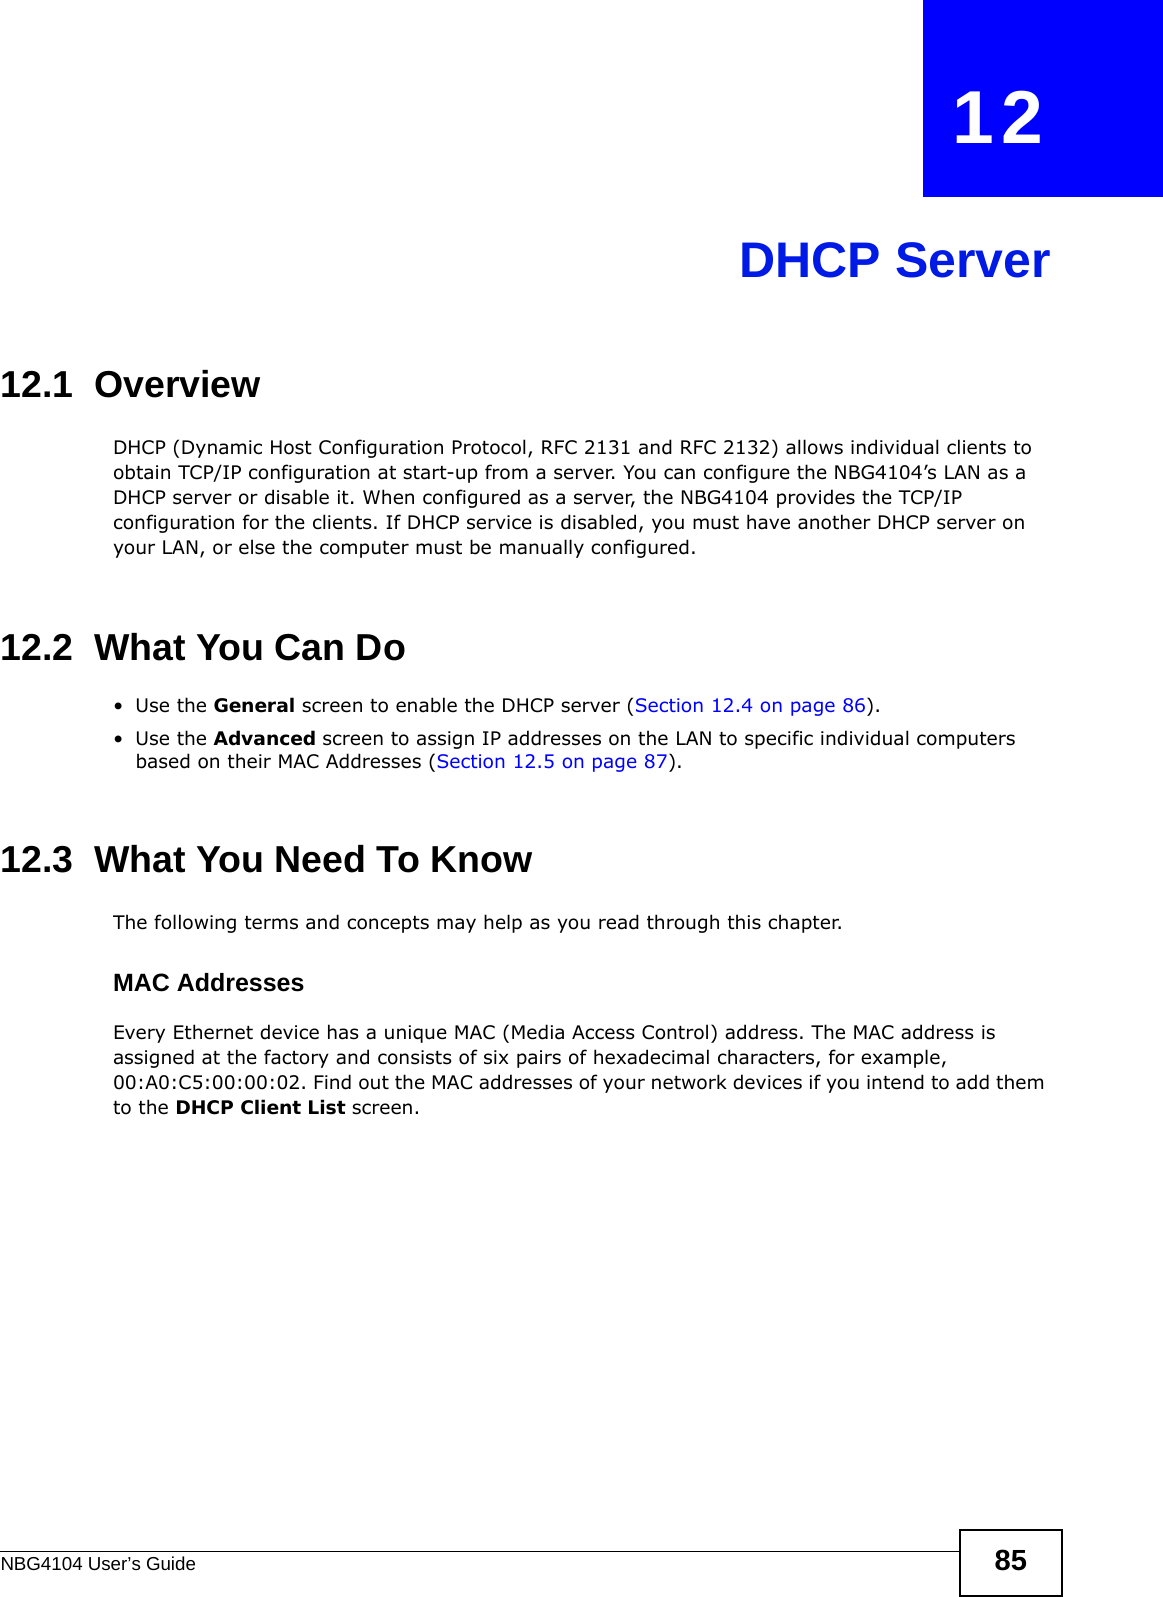 NBG4104 User’s Guide 85CHAPTER   12DHCP Server12.1  OverviewDHCP (Dynamic Host Configuration Protocol, RFC 2131 and RFC 2132) allows individual clients to obtain TCP/IP configuration at start-up from a server. You can configure the NBG4104’s LAN as a DHCP server or disable it. When configured as a server, the NBG4104 provides the TCP/IP configuration for the clients. If DHCP service is disabled, you must have another DHCP server on your LAN, or else the computer must be manually configured.12.2  What You Can Do•Use the General screen to enable the DHCP server (Section 12.4 on page 86).•Use the Advanced screen to assign IP addresses on the LAN to specific individual computers based on their MAC Addresses (Section 12.5 on page 87).12.3  What You Need To KnowThe following terms and concepts may help as you read through this chapter.MAC AddressesEvery Ethernet device has a unique MAC (Media Access Control) address. The MAC address is assigned at the factory and consists of six pairs of hexadecimal characters, for example, 00:A0:C5:00:00:02. Find out the MAC addresses of your network devices if you intend to add them to the DHCP Client List screen.